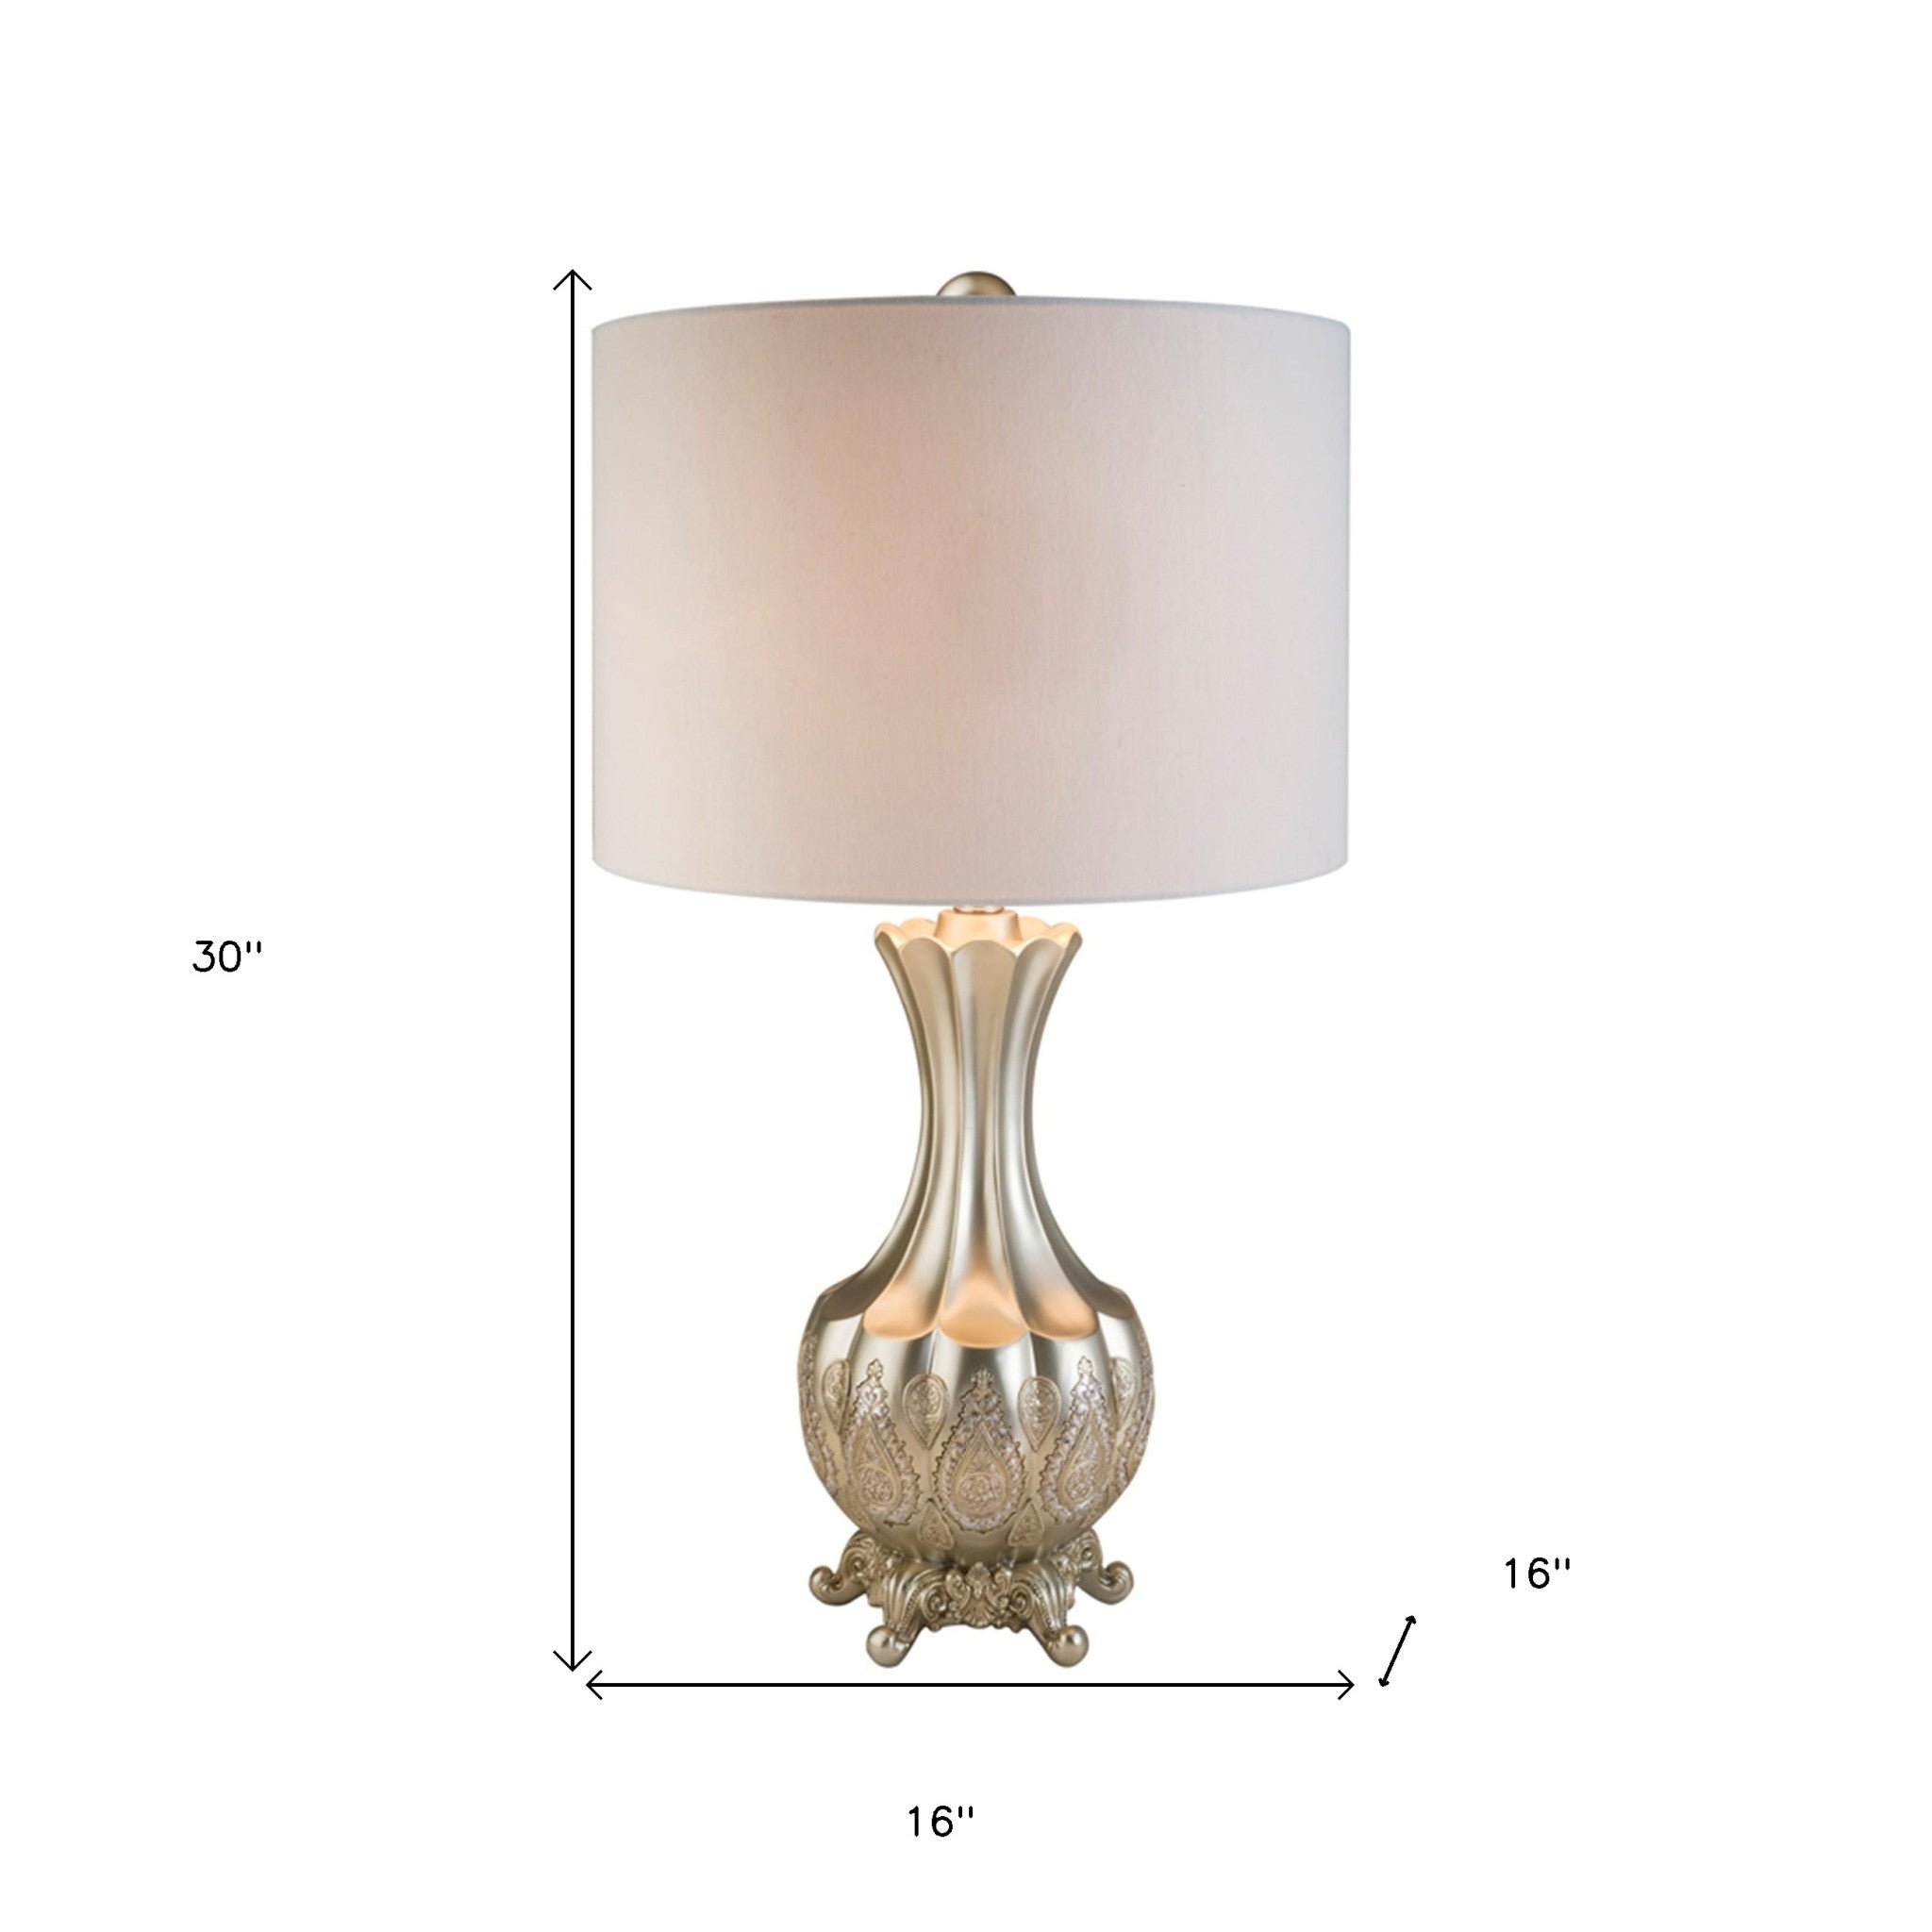 Elegant Silver Table Lamp With White Linen Lamp Shade